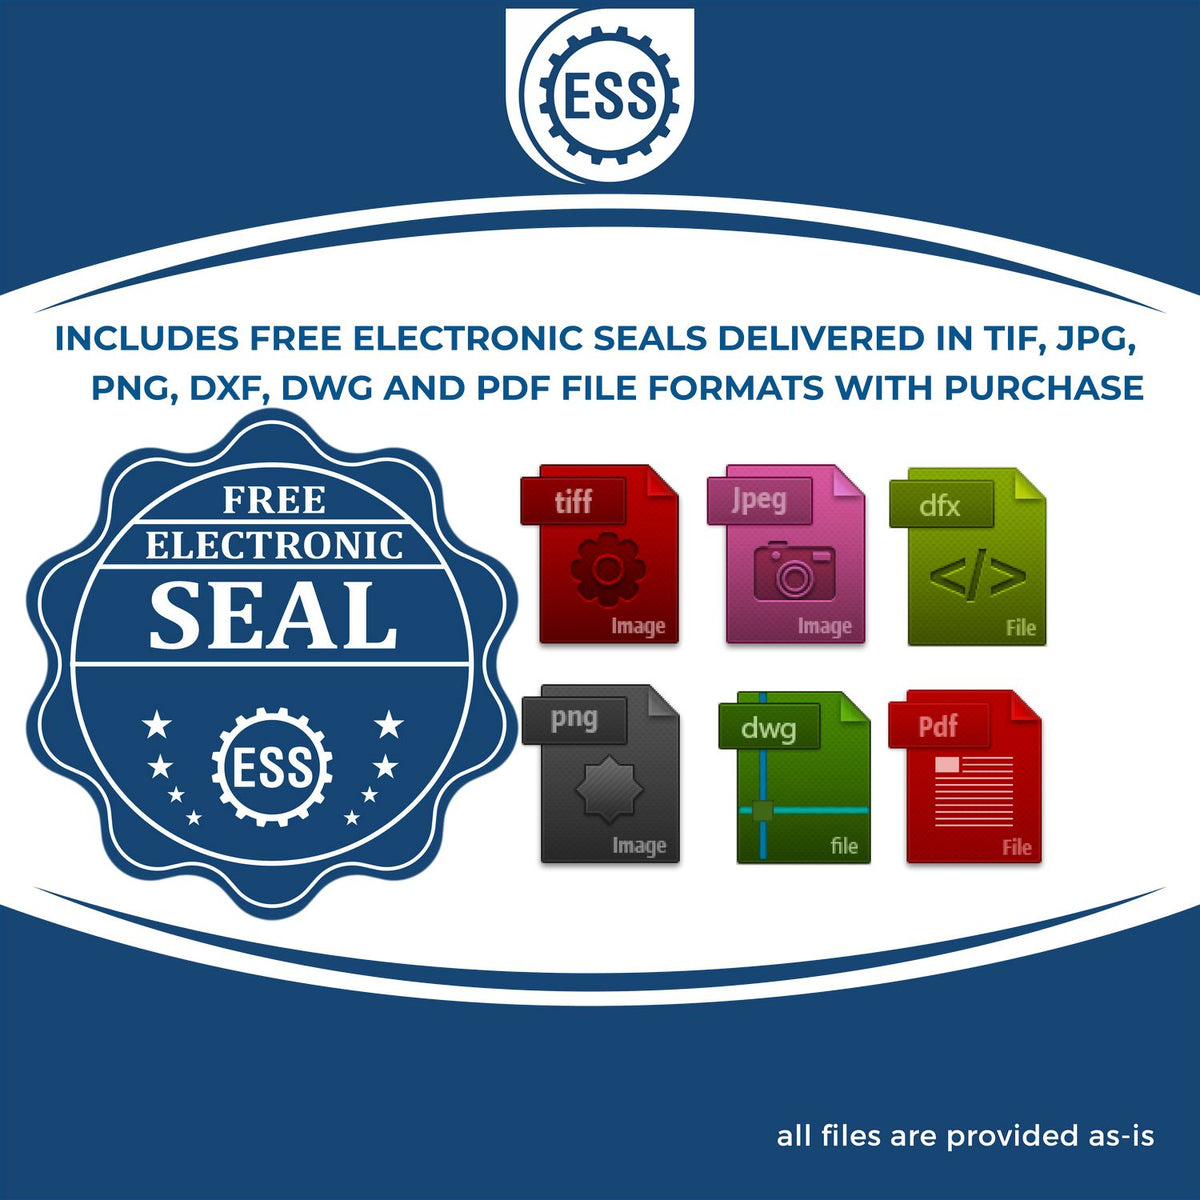 An infographic for the free electronic seal for the Premium MaxLight Pre-Inked Pennsylvania Engineering Stamp illustrating the different file type icons such as DXF, DWG, TIF, JPG and PNG.